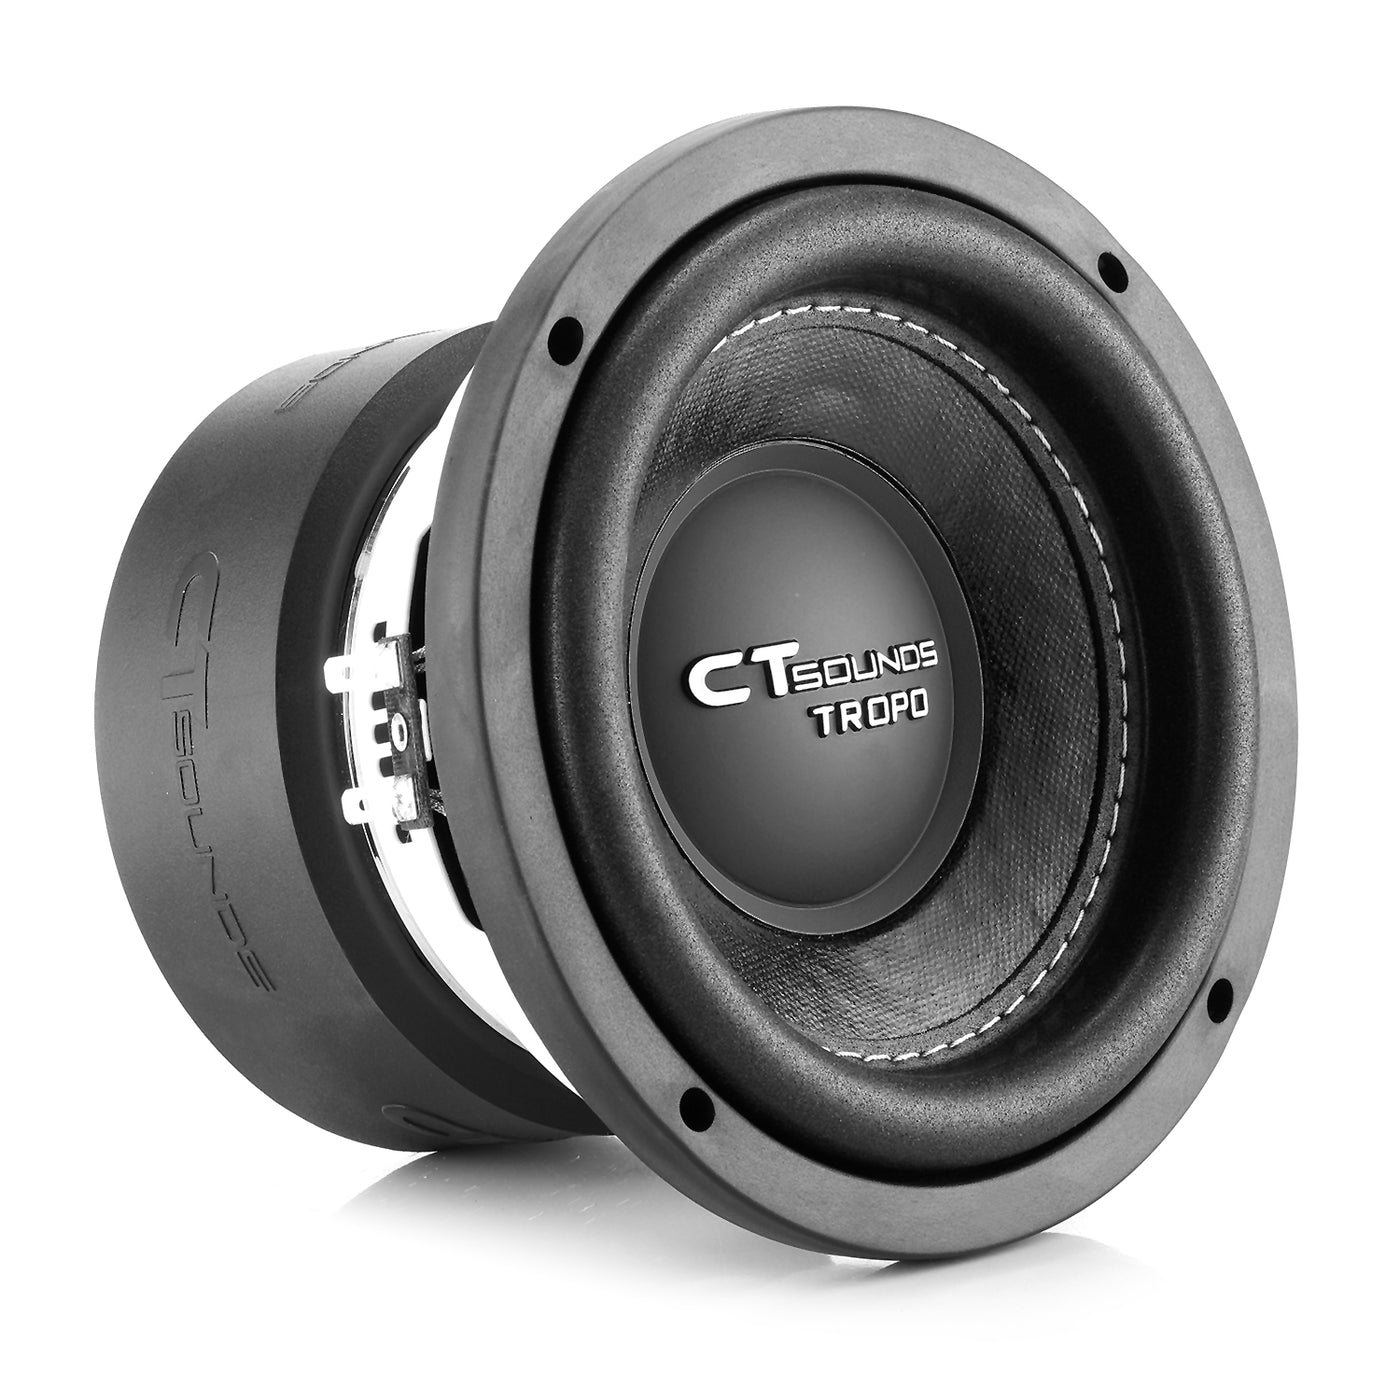 TROPO-6-5-D4 // 200 Watts RMS 6.5 Inch Car Subwoofer - CT SOUNDS